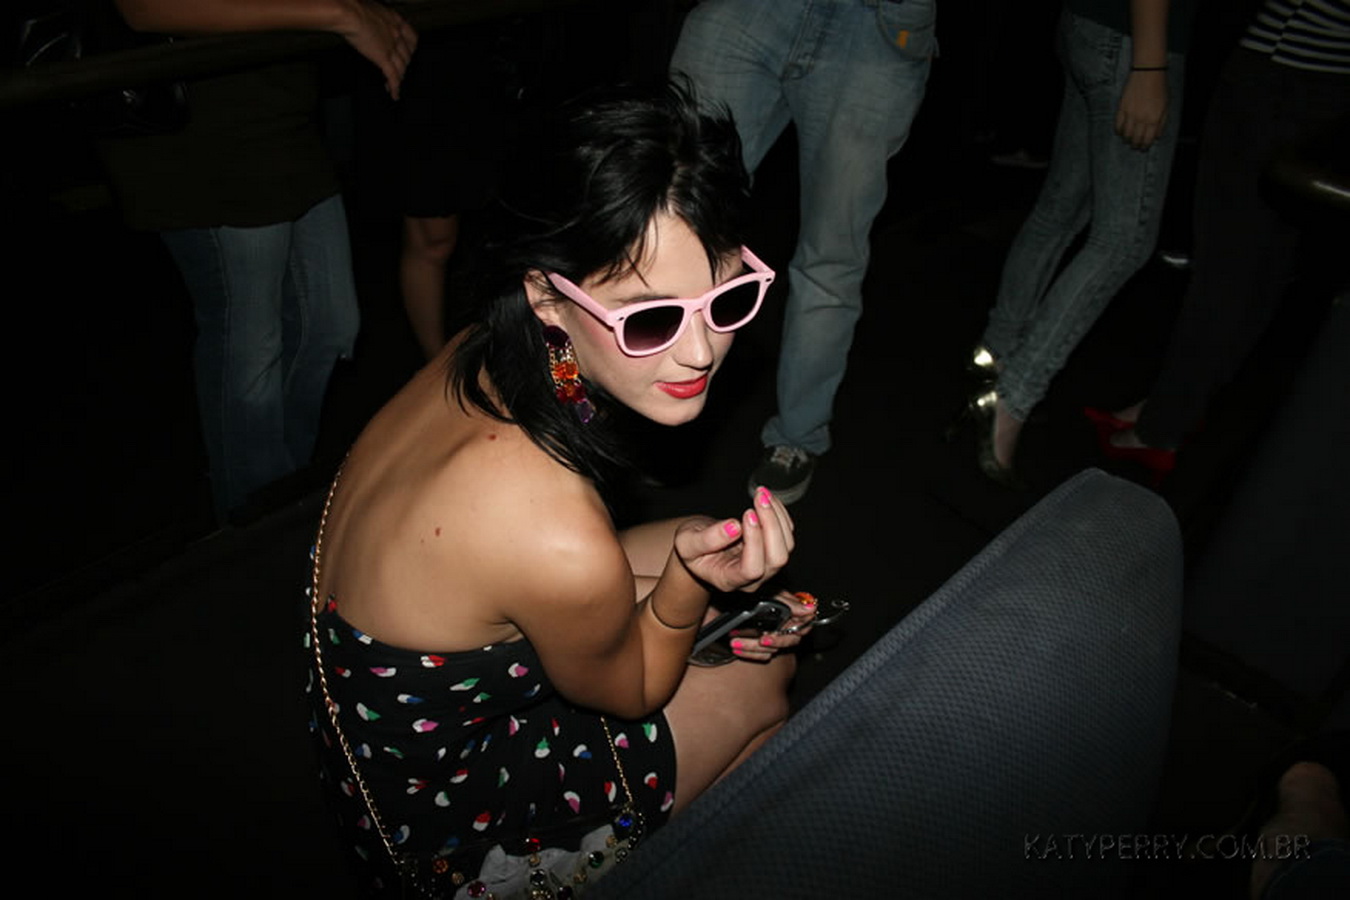 Katy_Perry_bobsslip_drunk_cleavage_downblouse_upskirt_nipslip_at_her_birthday_2007_party_99x_HQ_48.jpg